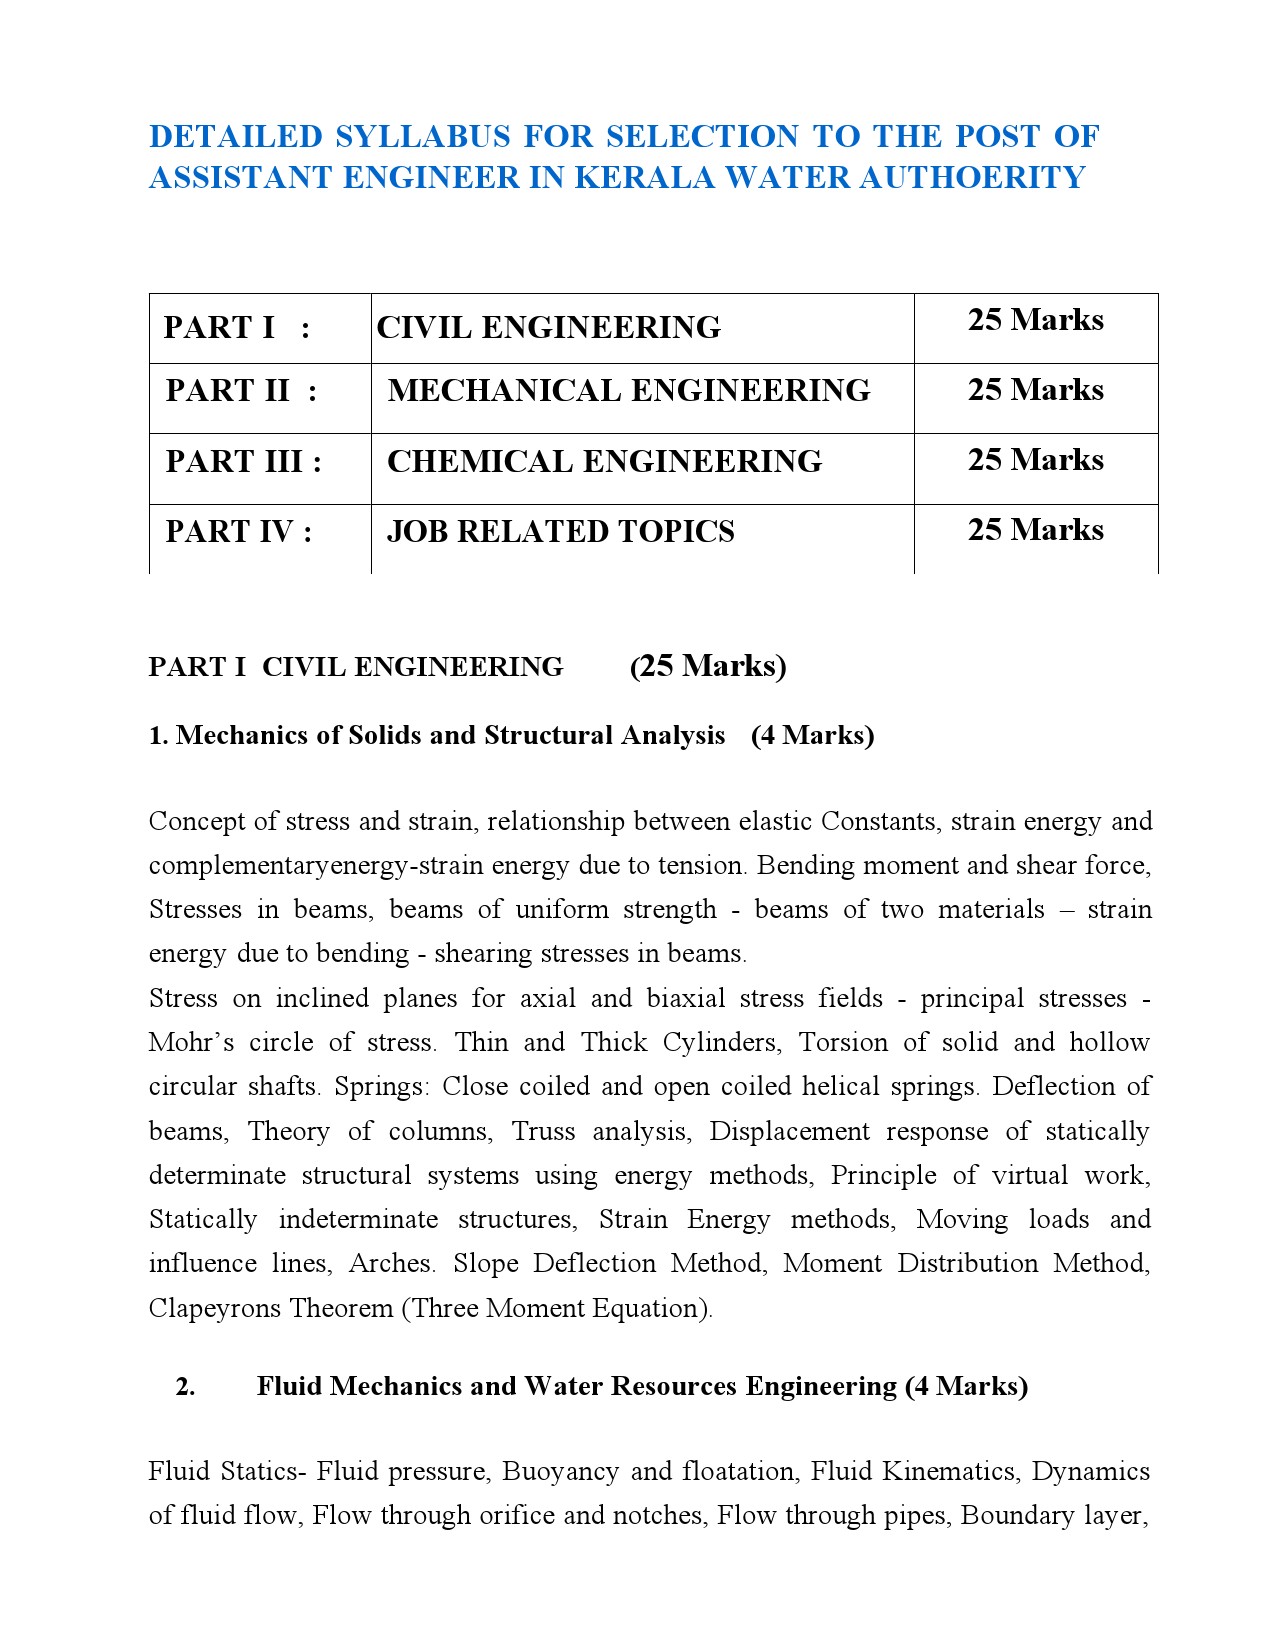 Syllabus For Assistant Engineer In Kerala Water Authority - Notification Image 1